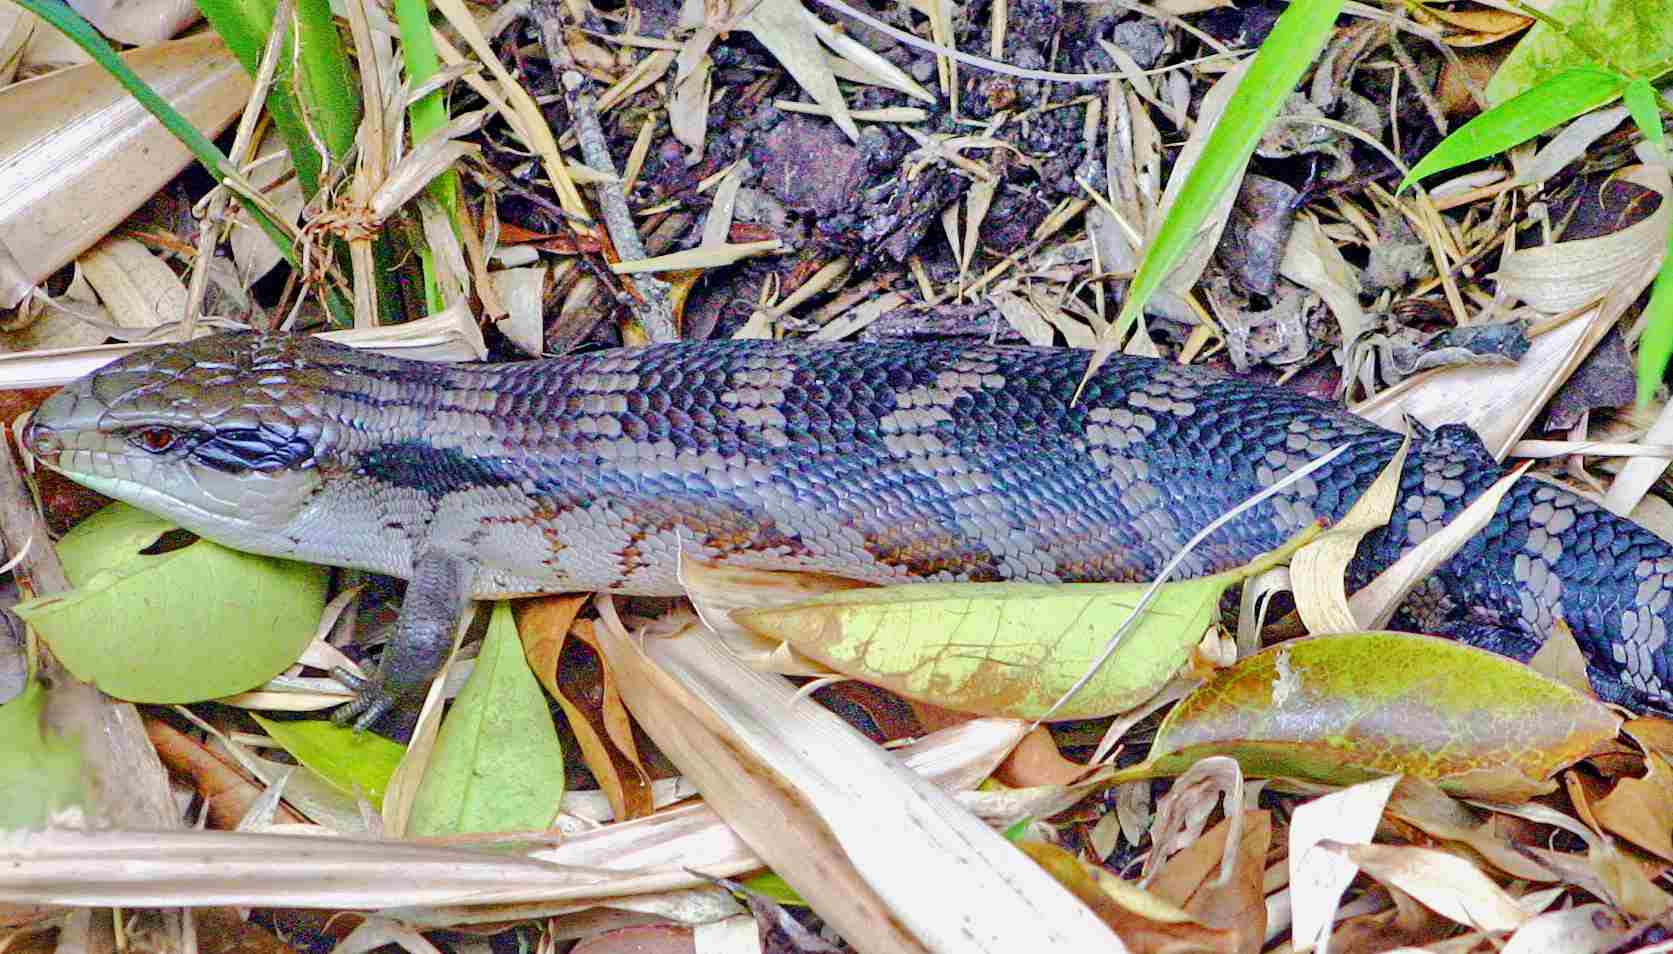 Are Lizards Carnivores: Green Iguanas and Blue-Tongued Skinks Can be Described as Herbivorous Lizards (Credit: Malcolm Morley 2004 .CC BY-SA 3.0.)